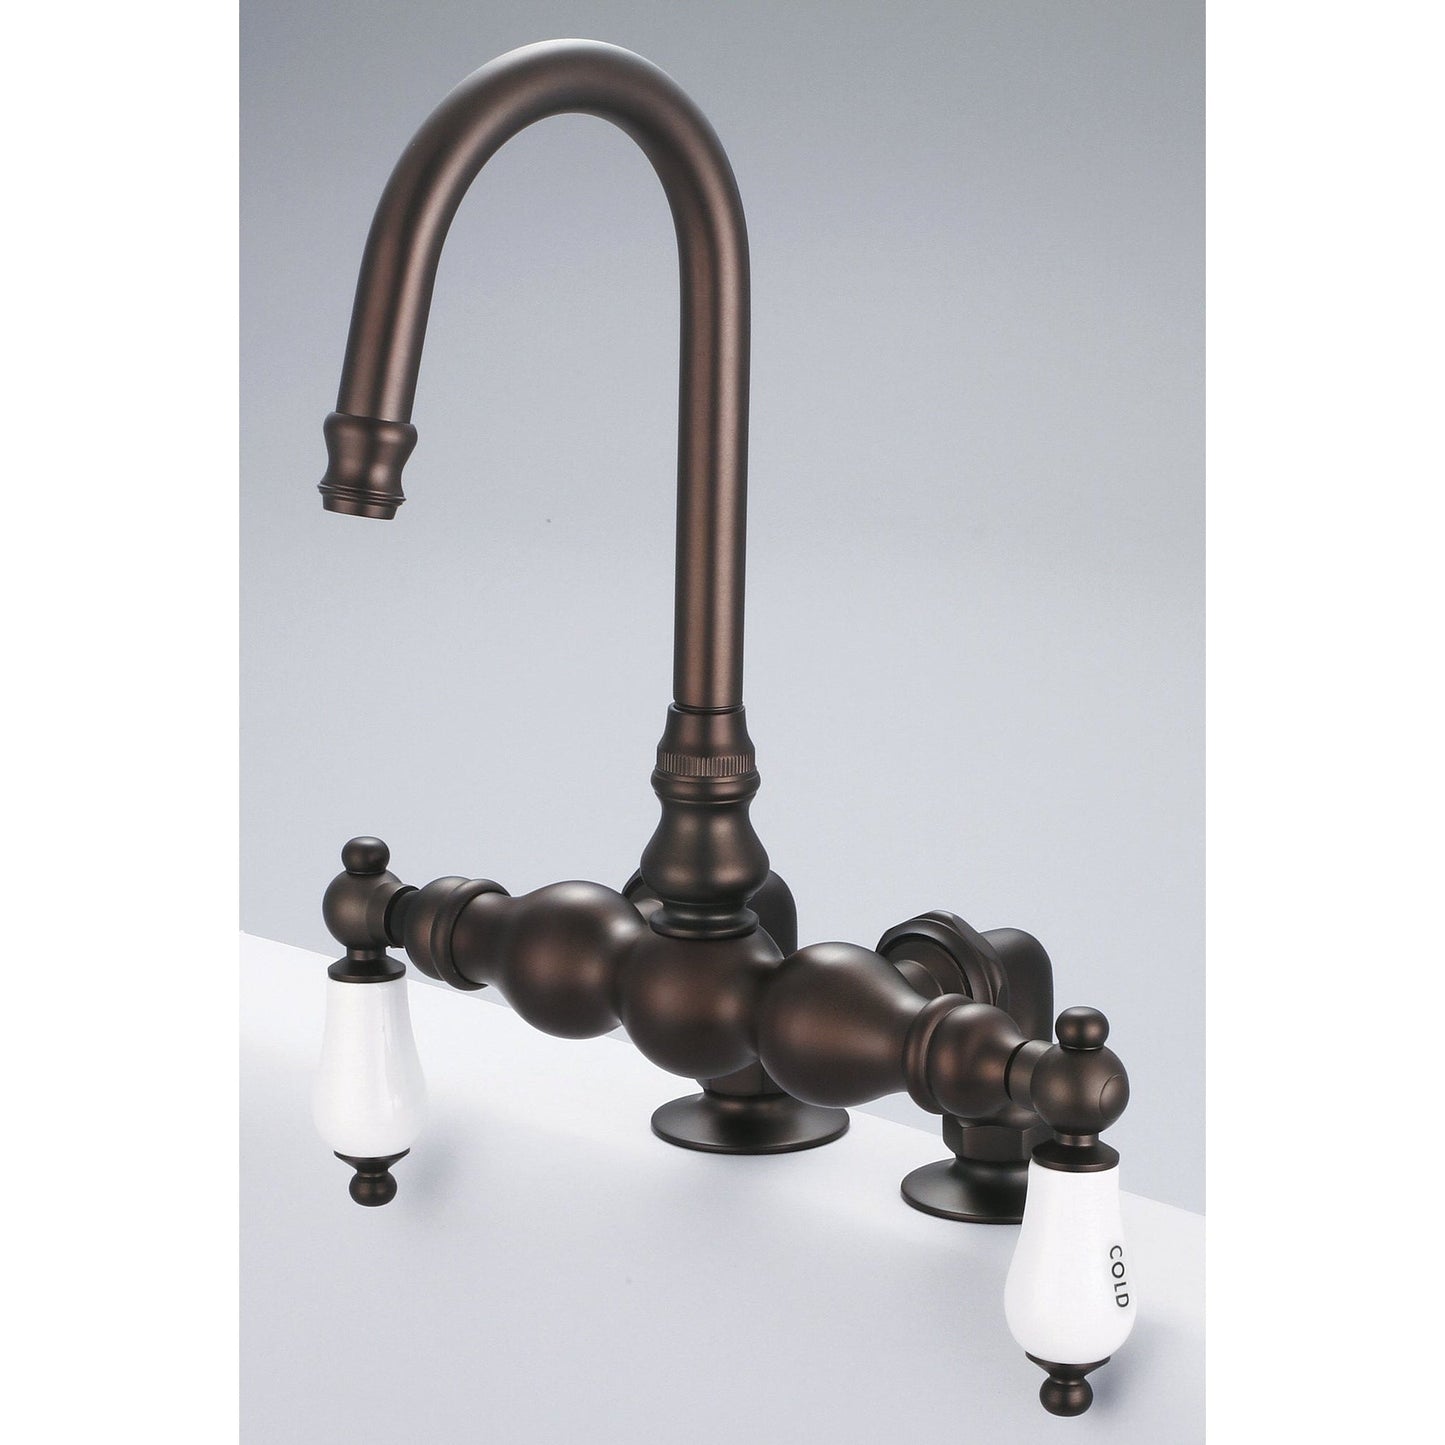 Water Creation Vintage Classic Center Deck Mount Tub F6-0016 9.25" Brown Solid Brass Faucet With Gooseneck Spout And 2-Inch Risers And Porcelain Lever Handles, Hot And Cold Labels Included